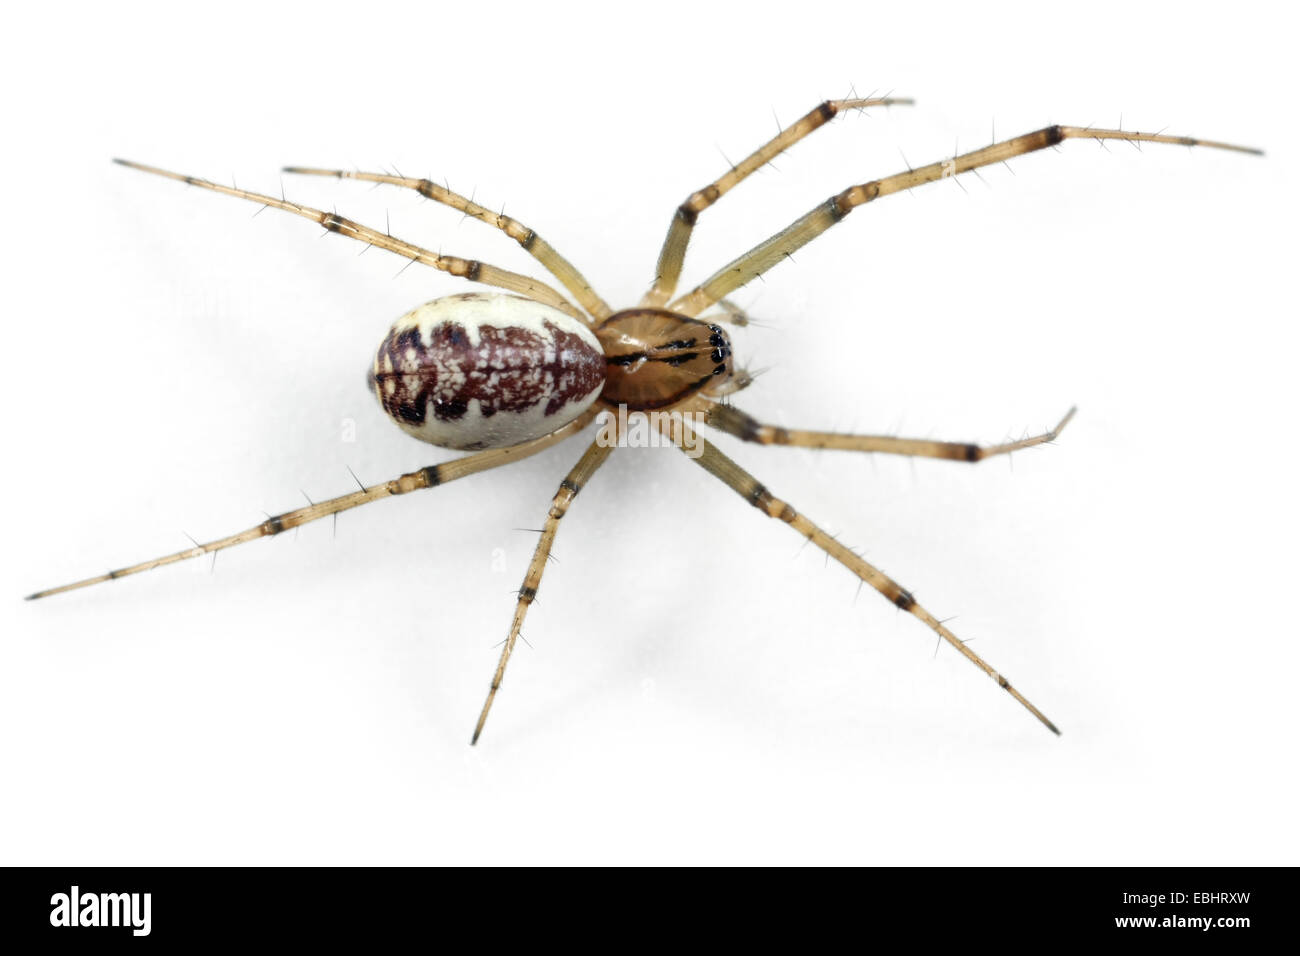 A female Common Hammock-weaver (Linyphia triangularis) spider on a white background, part of the family Linyphiidae - Sheetweb weavers. Stock Photo